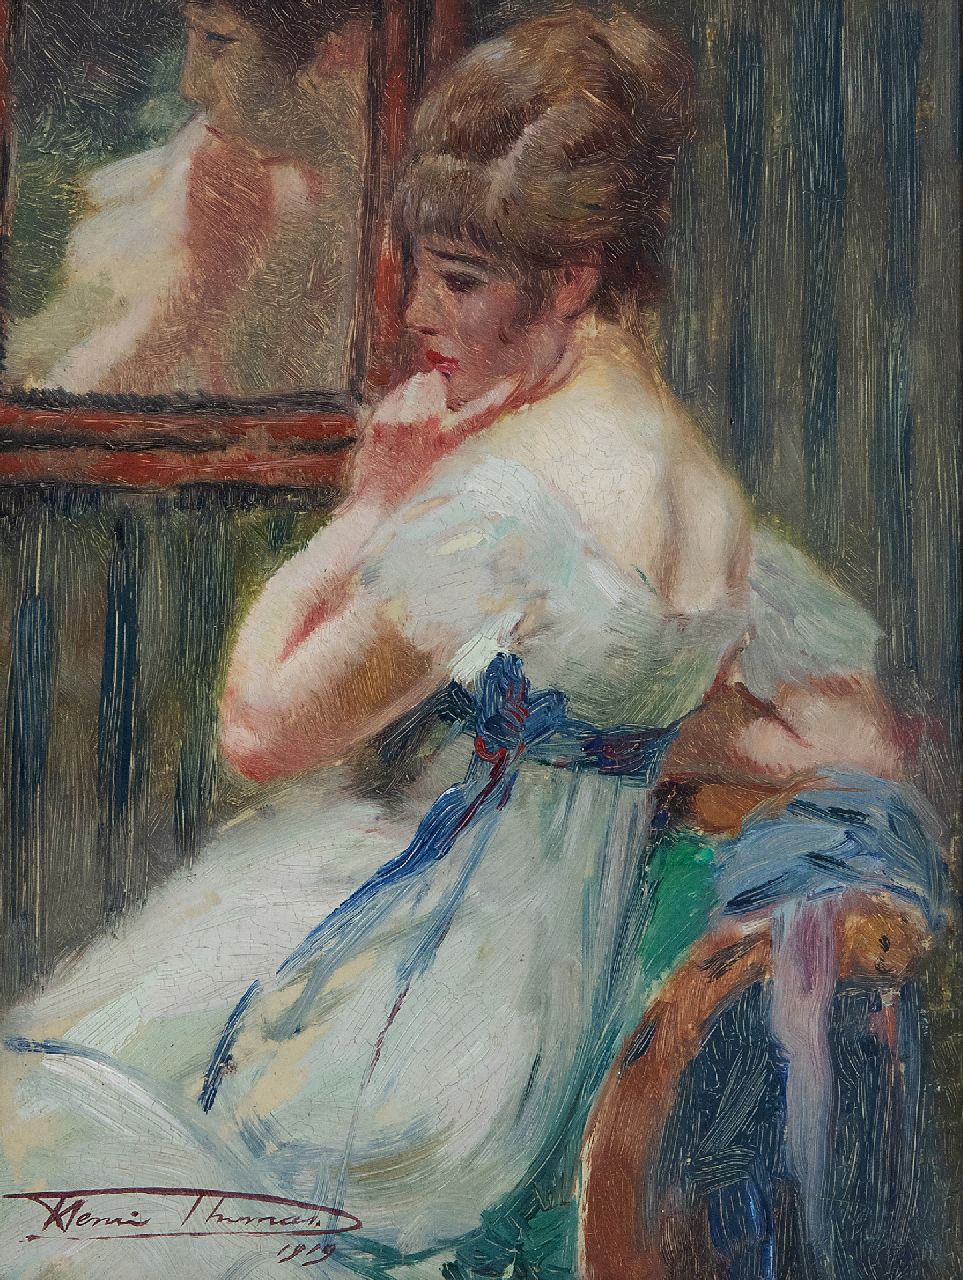 Thomas H.J.  | Henri Joseph Thomas | Paintings offered for sale | In a pensive mood, oil on panel 22.7 x 17.2 cm, signed l.l. and painted 1919